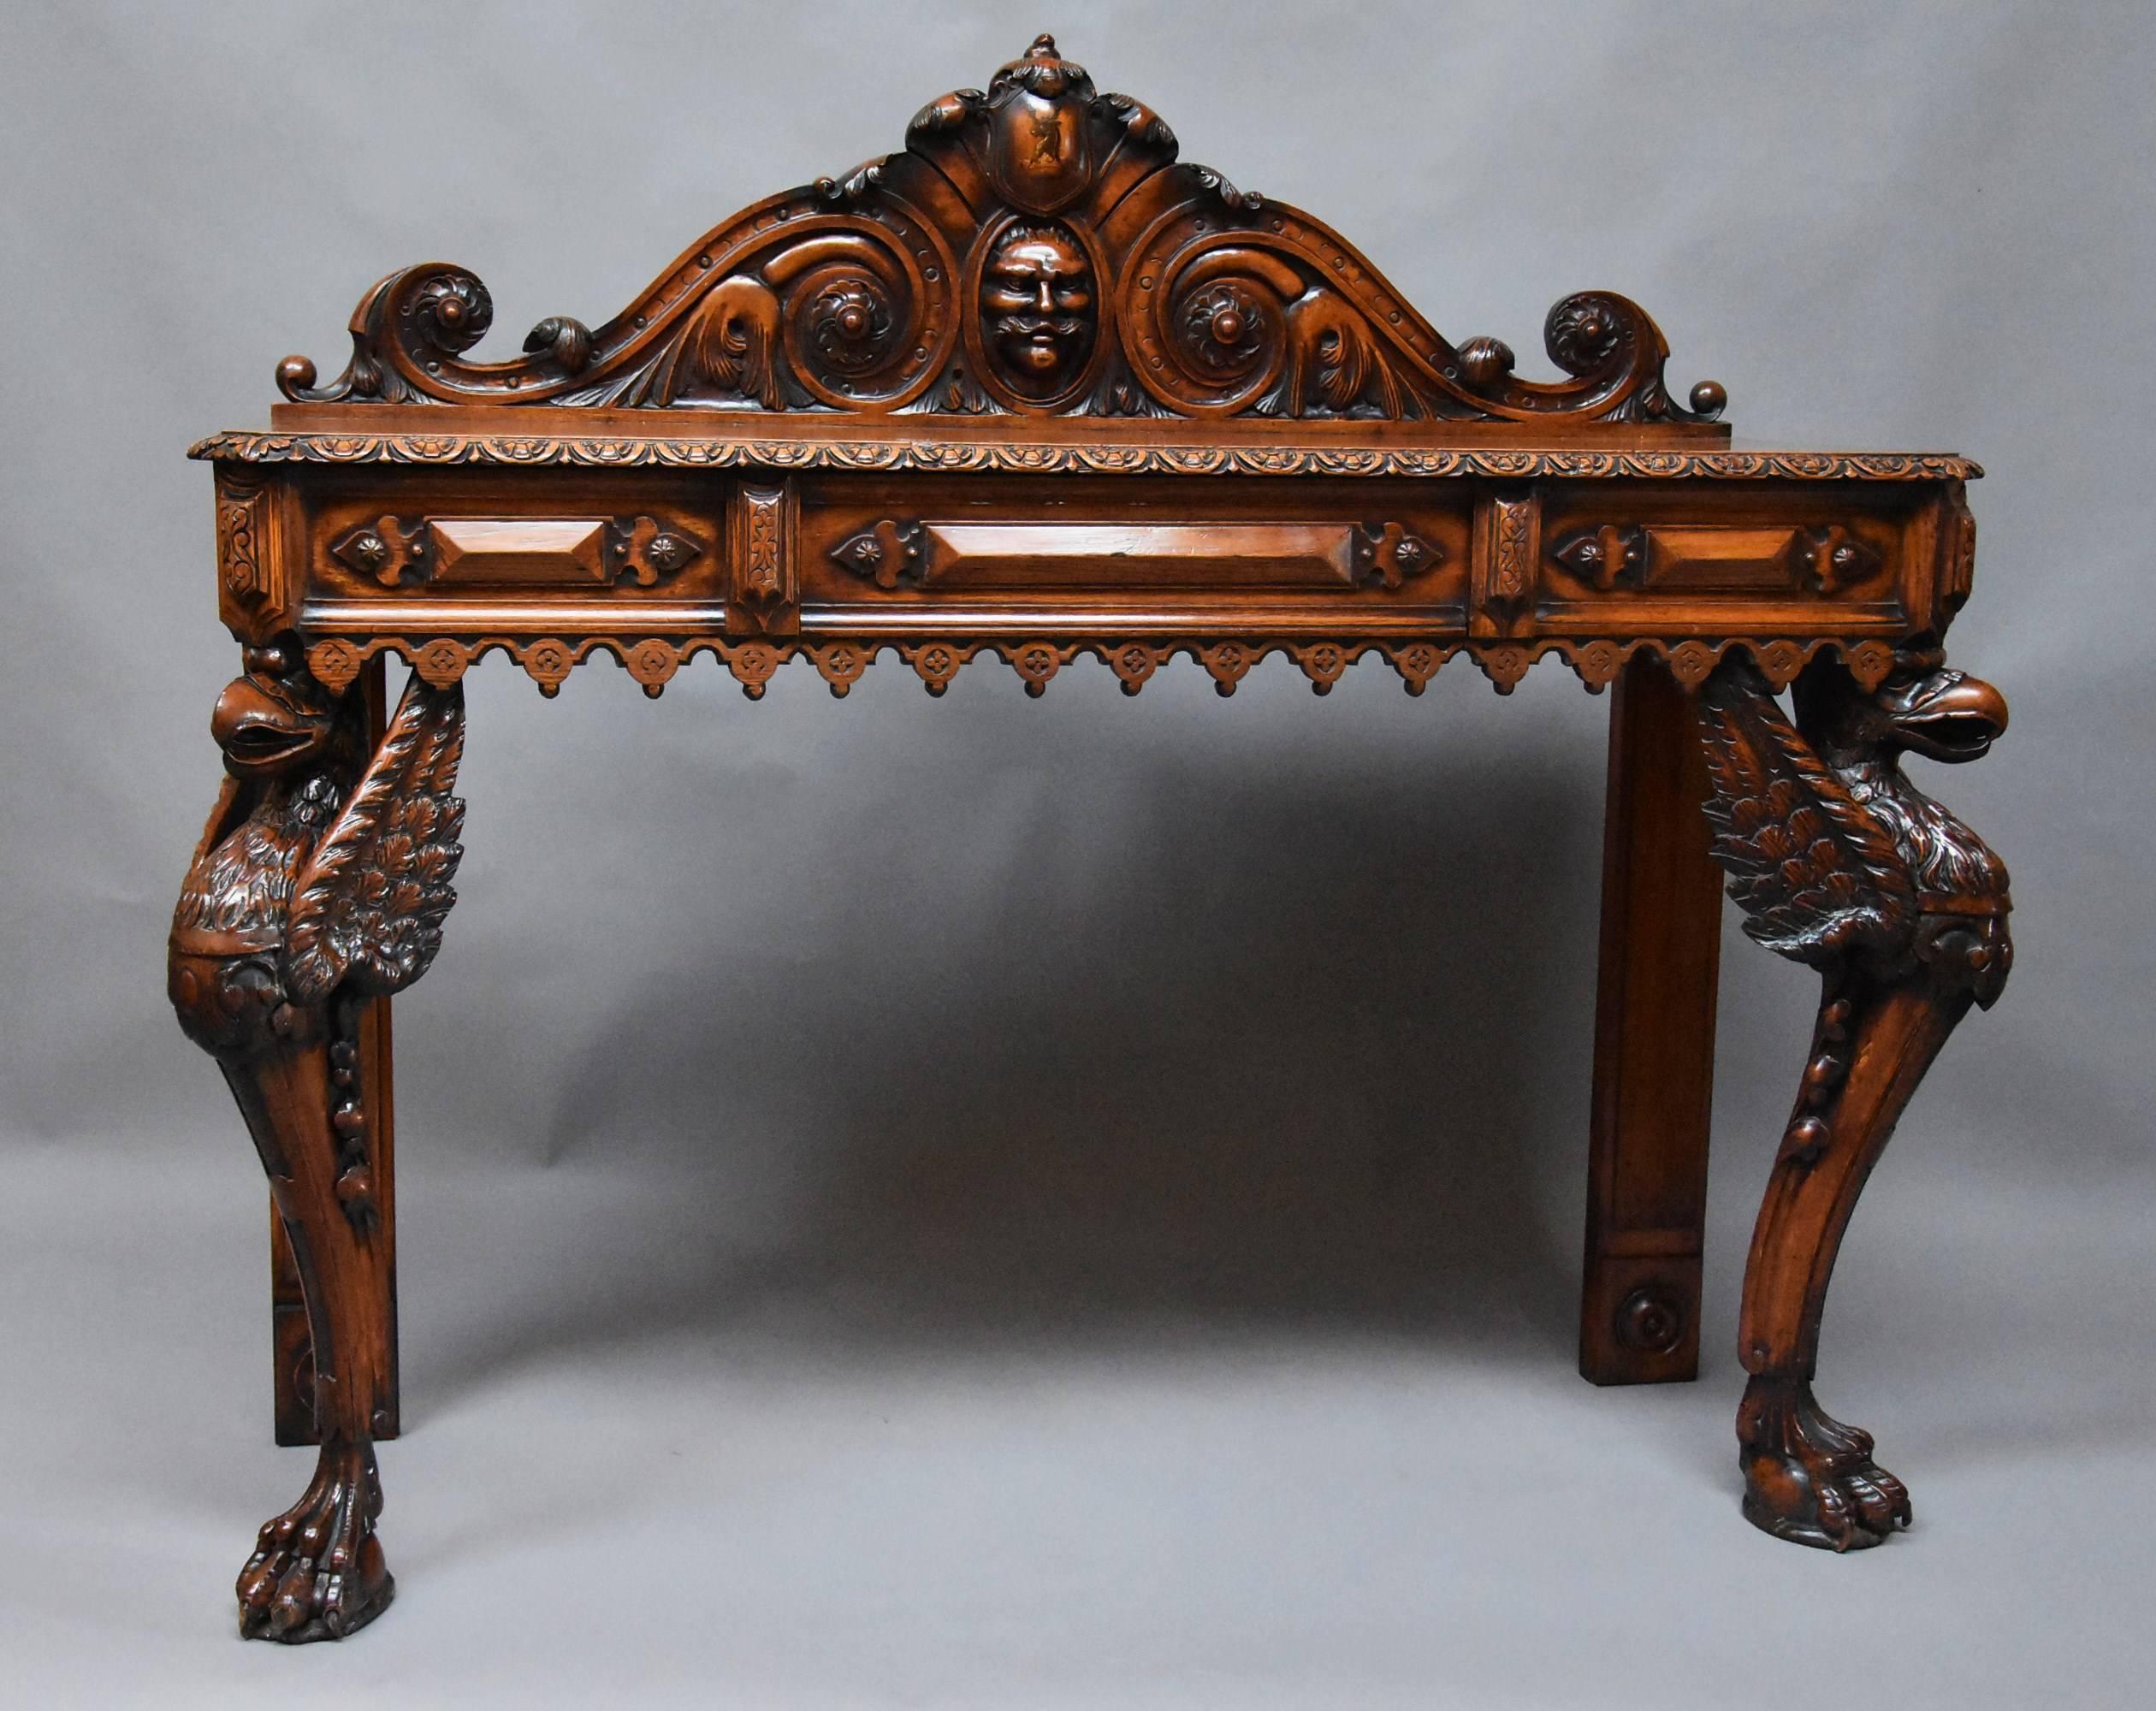 A wonderful quality and superbly carved mid-19th century oak hall table.

This finely executed table consists of a superbly carved and shaped back board with central painted armorial of a stag and crown to the top.

This leads down to an oval